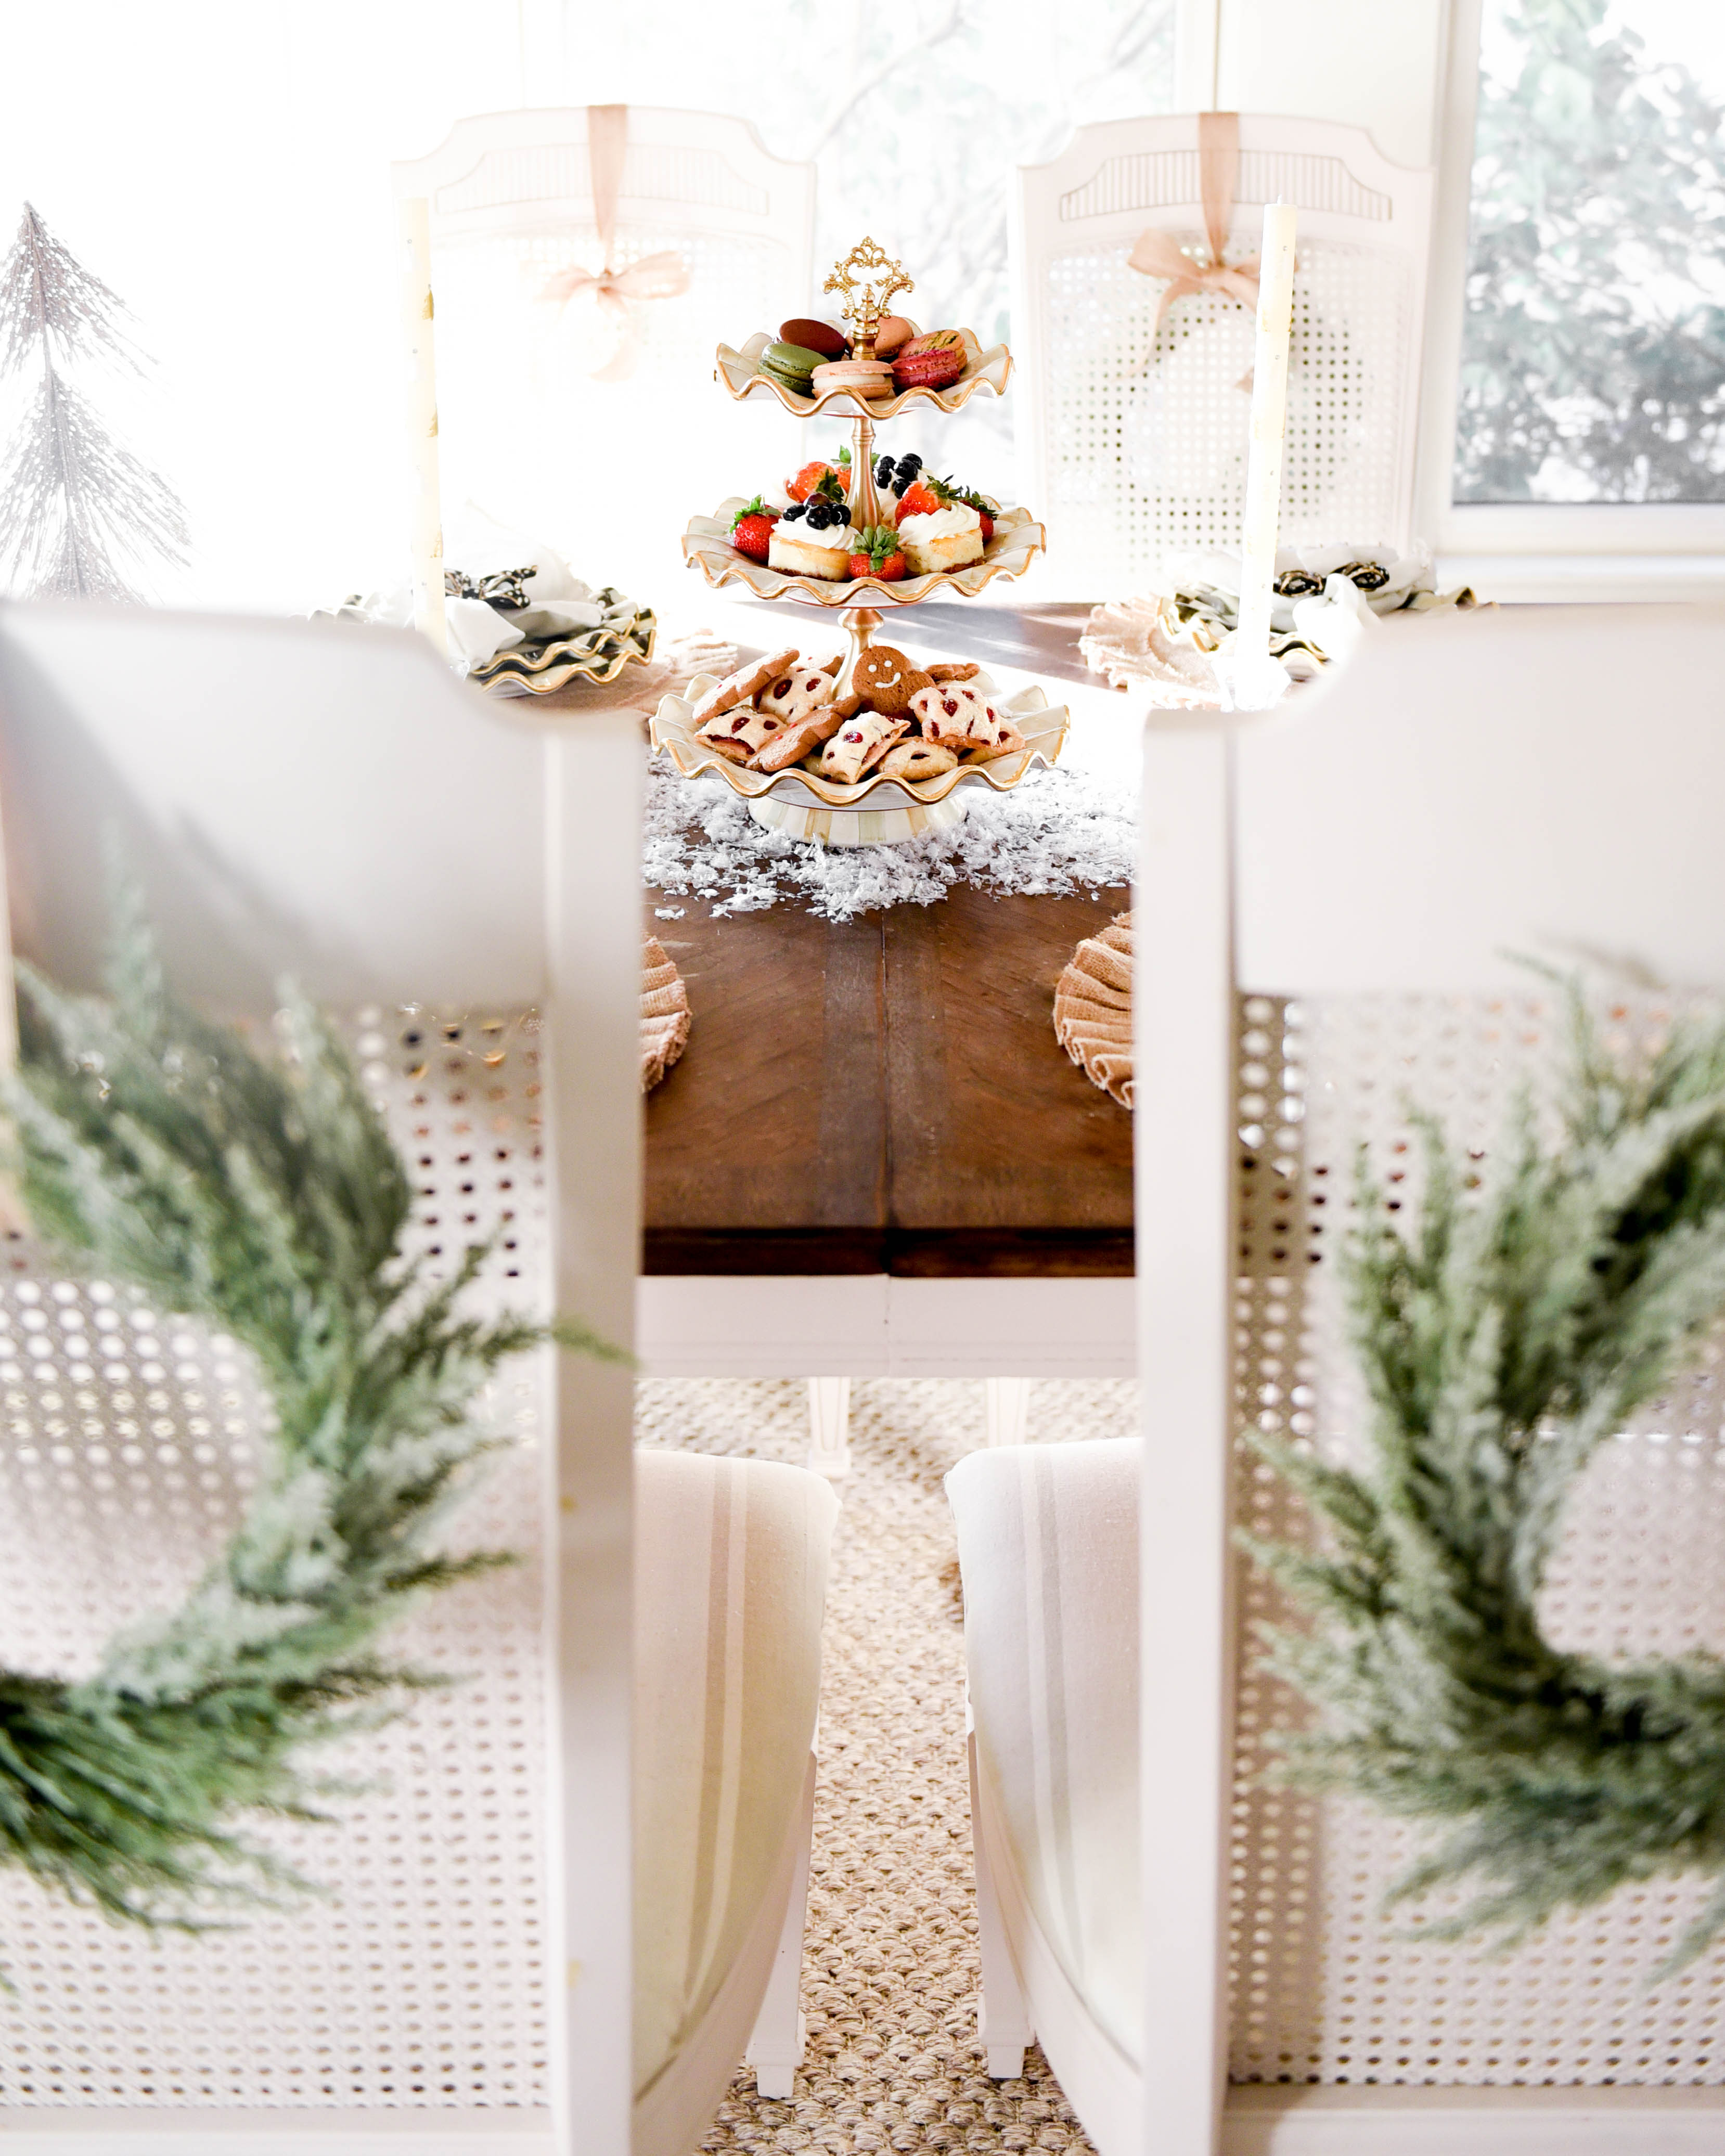 Lo-Murphy-Mackenzie-Childs-Holiday-Tablescape-Home-Decor